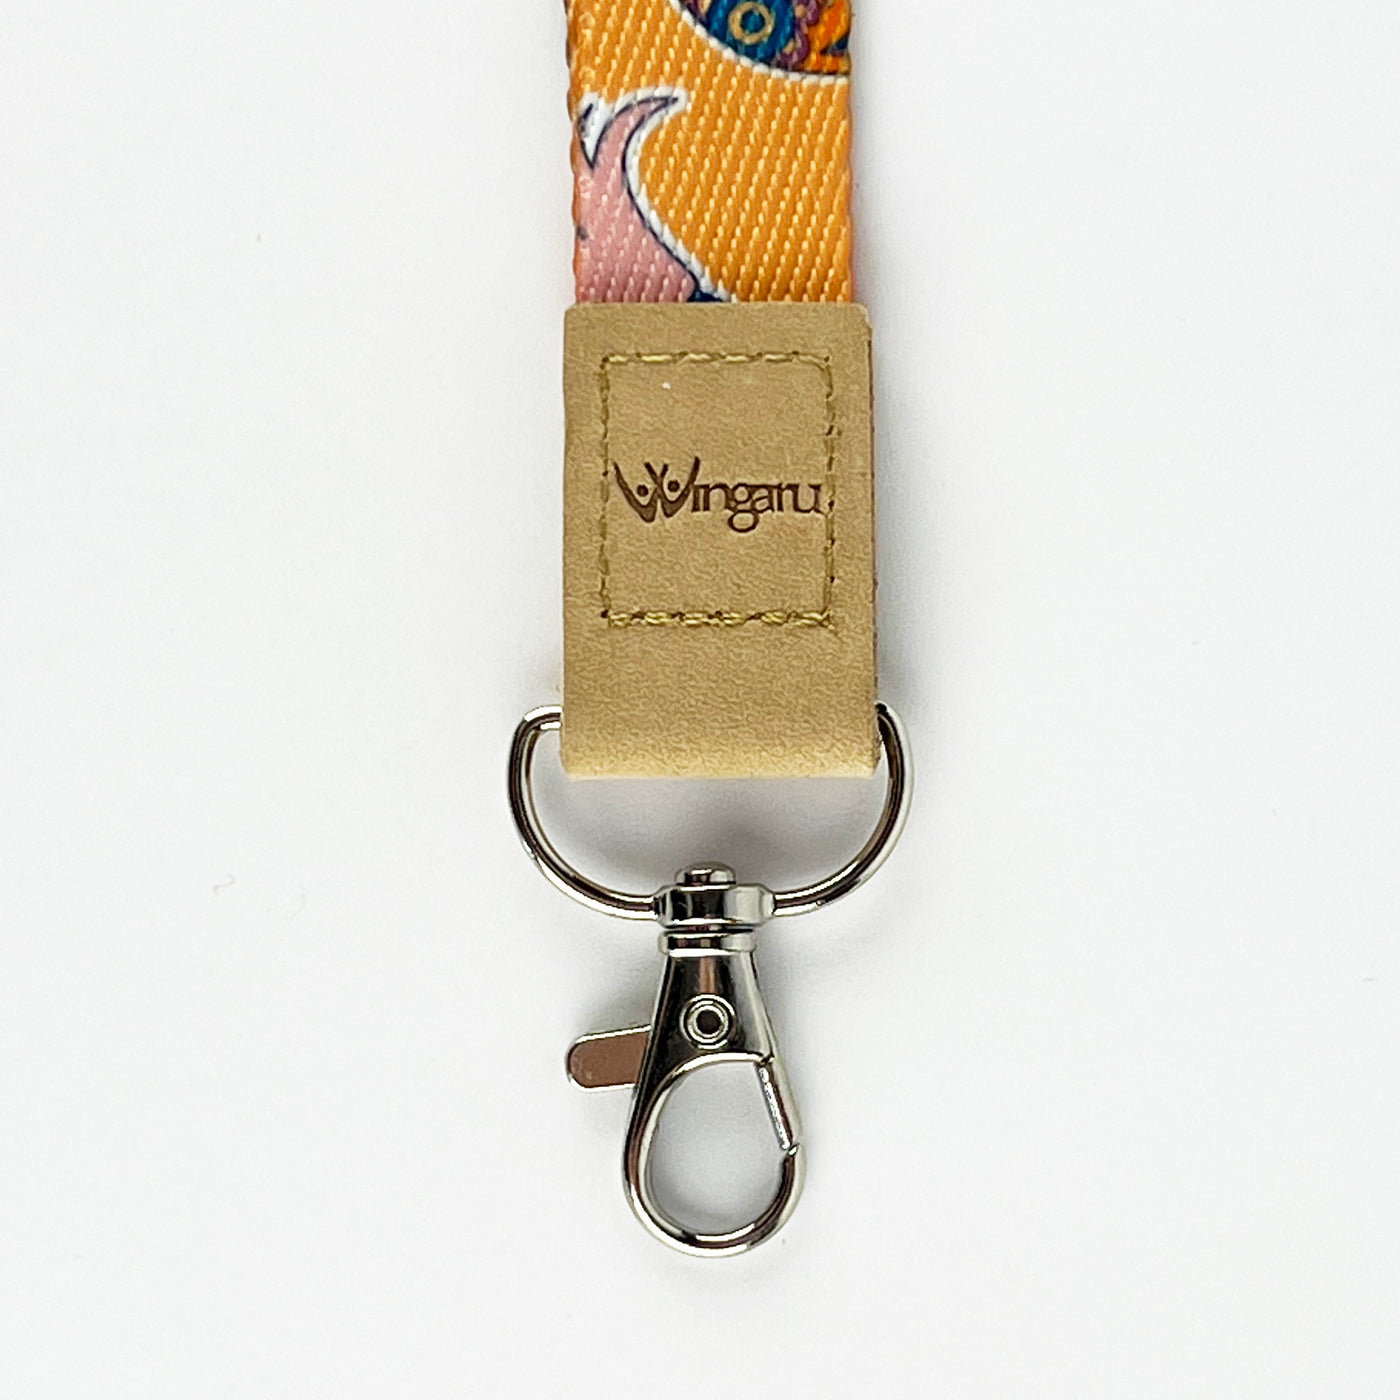 Lanyards Featuring First Nations Artwork